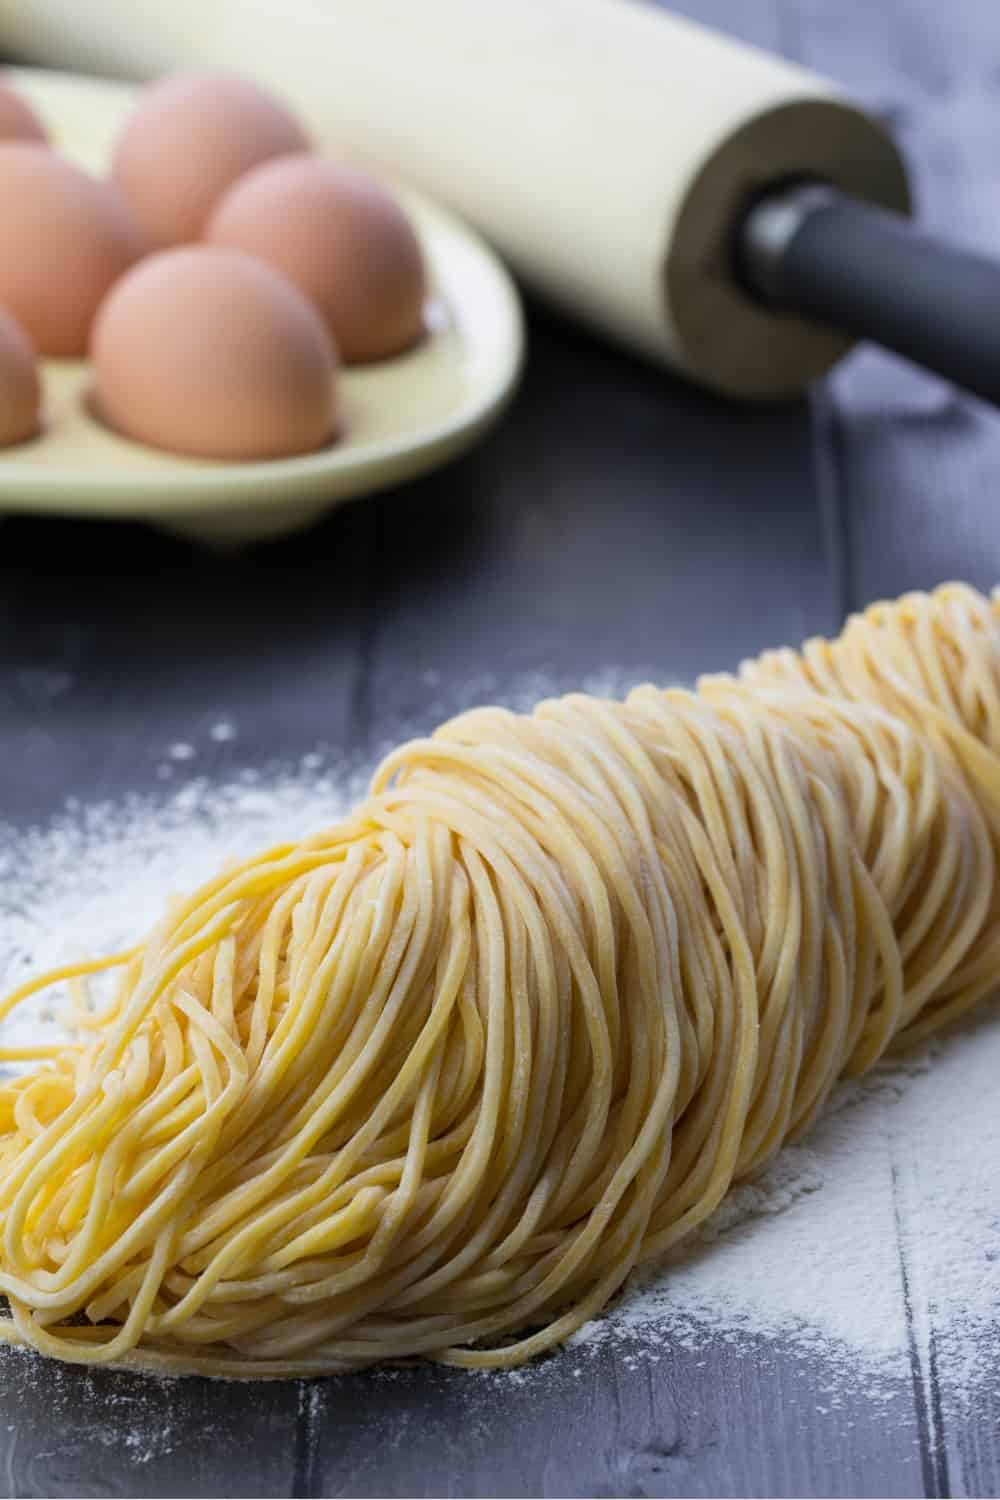 Homemade egg noodles with eggs, wheat flour and wooden rolling pin on the black wooden background